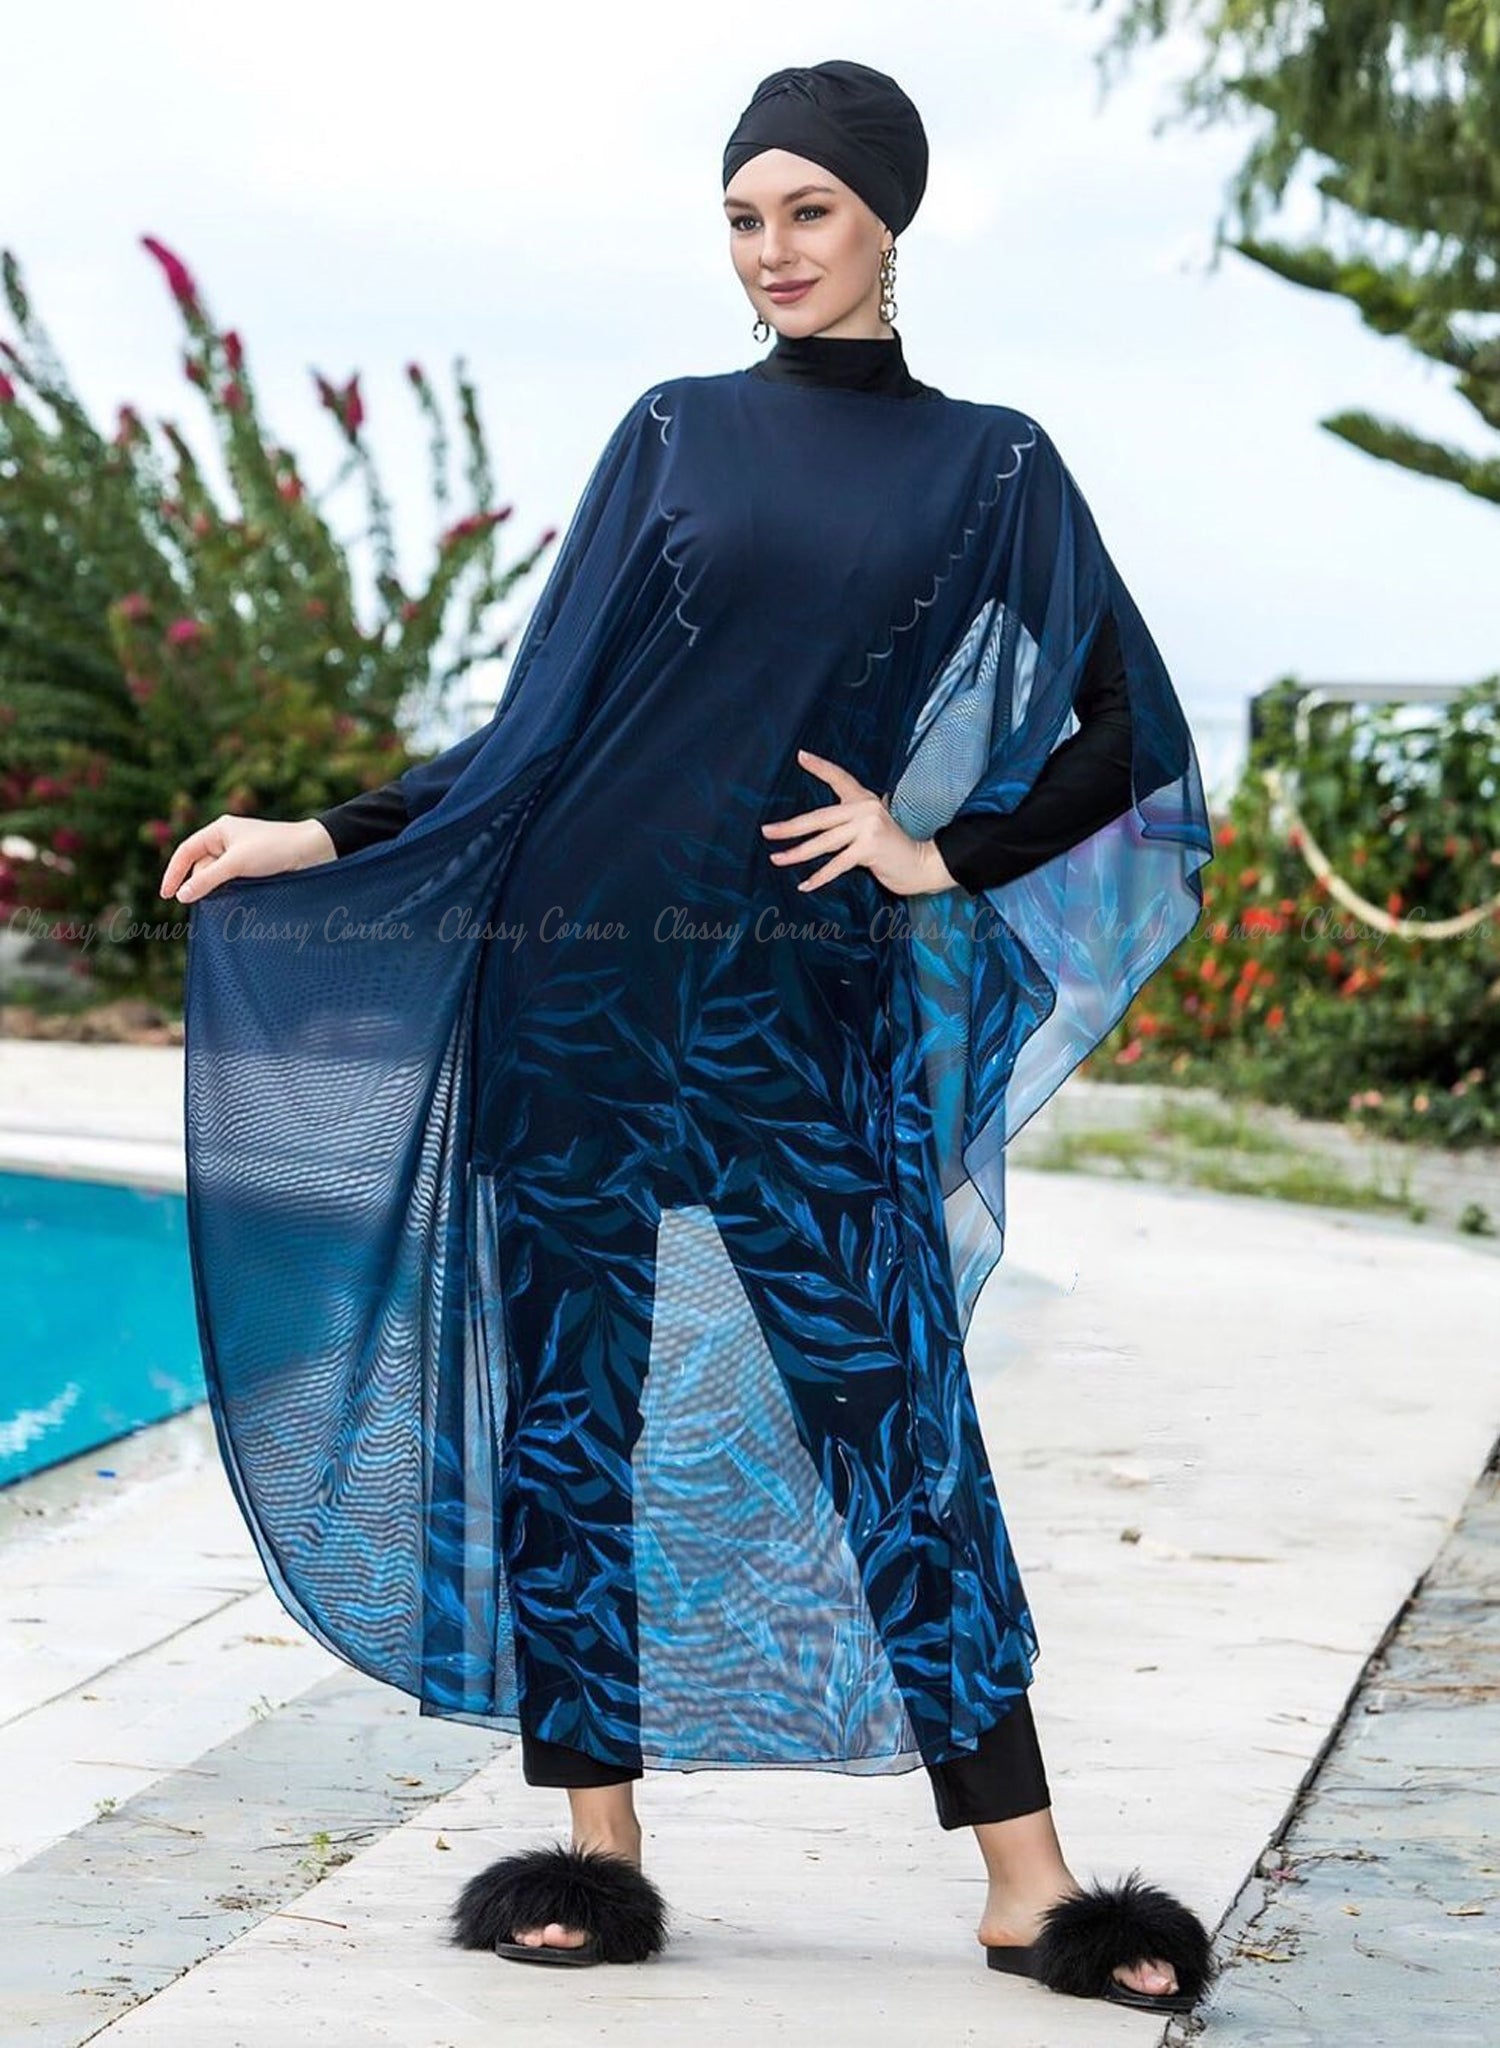 Shades of Blue Leafy Print Navy Blue Swim Wear Cover Up